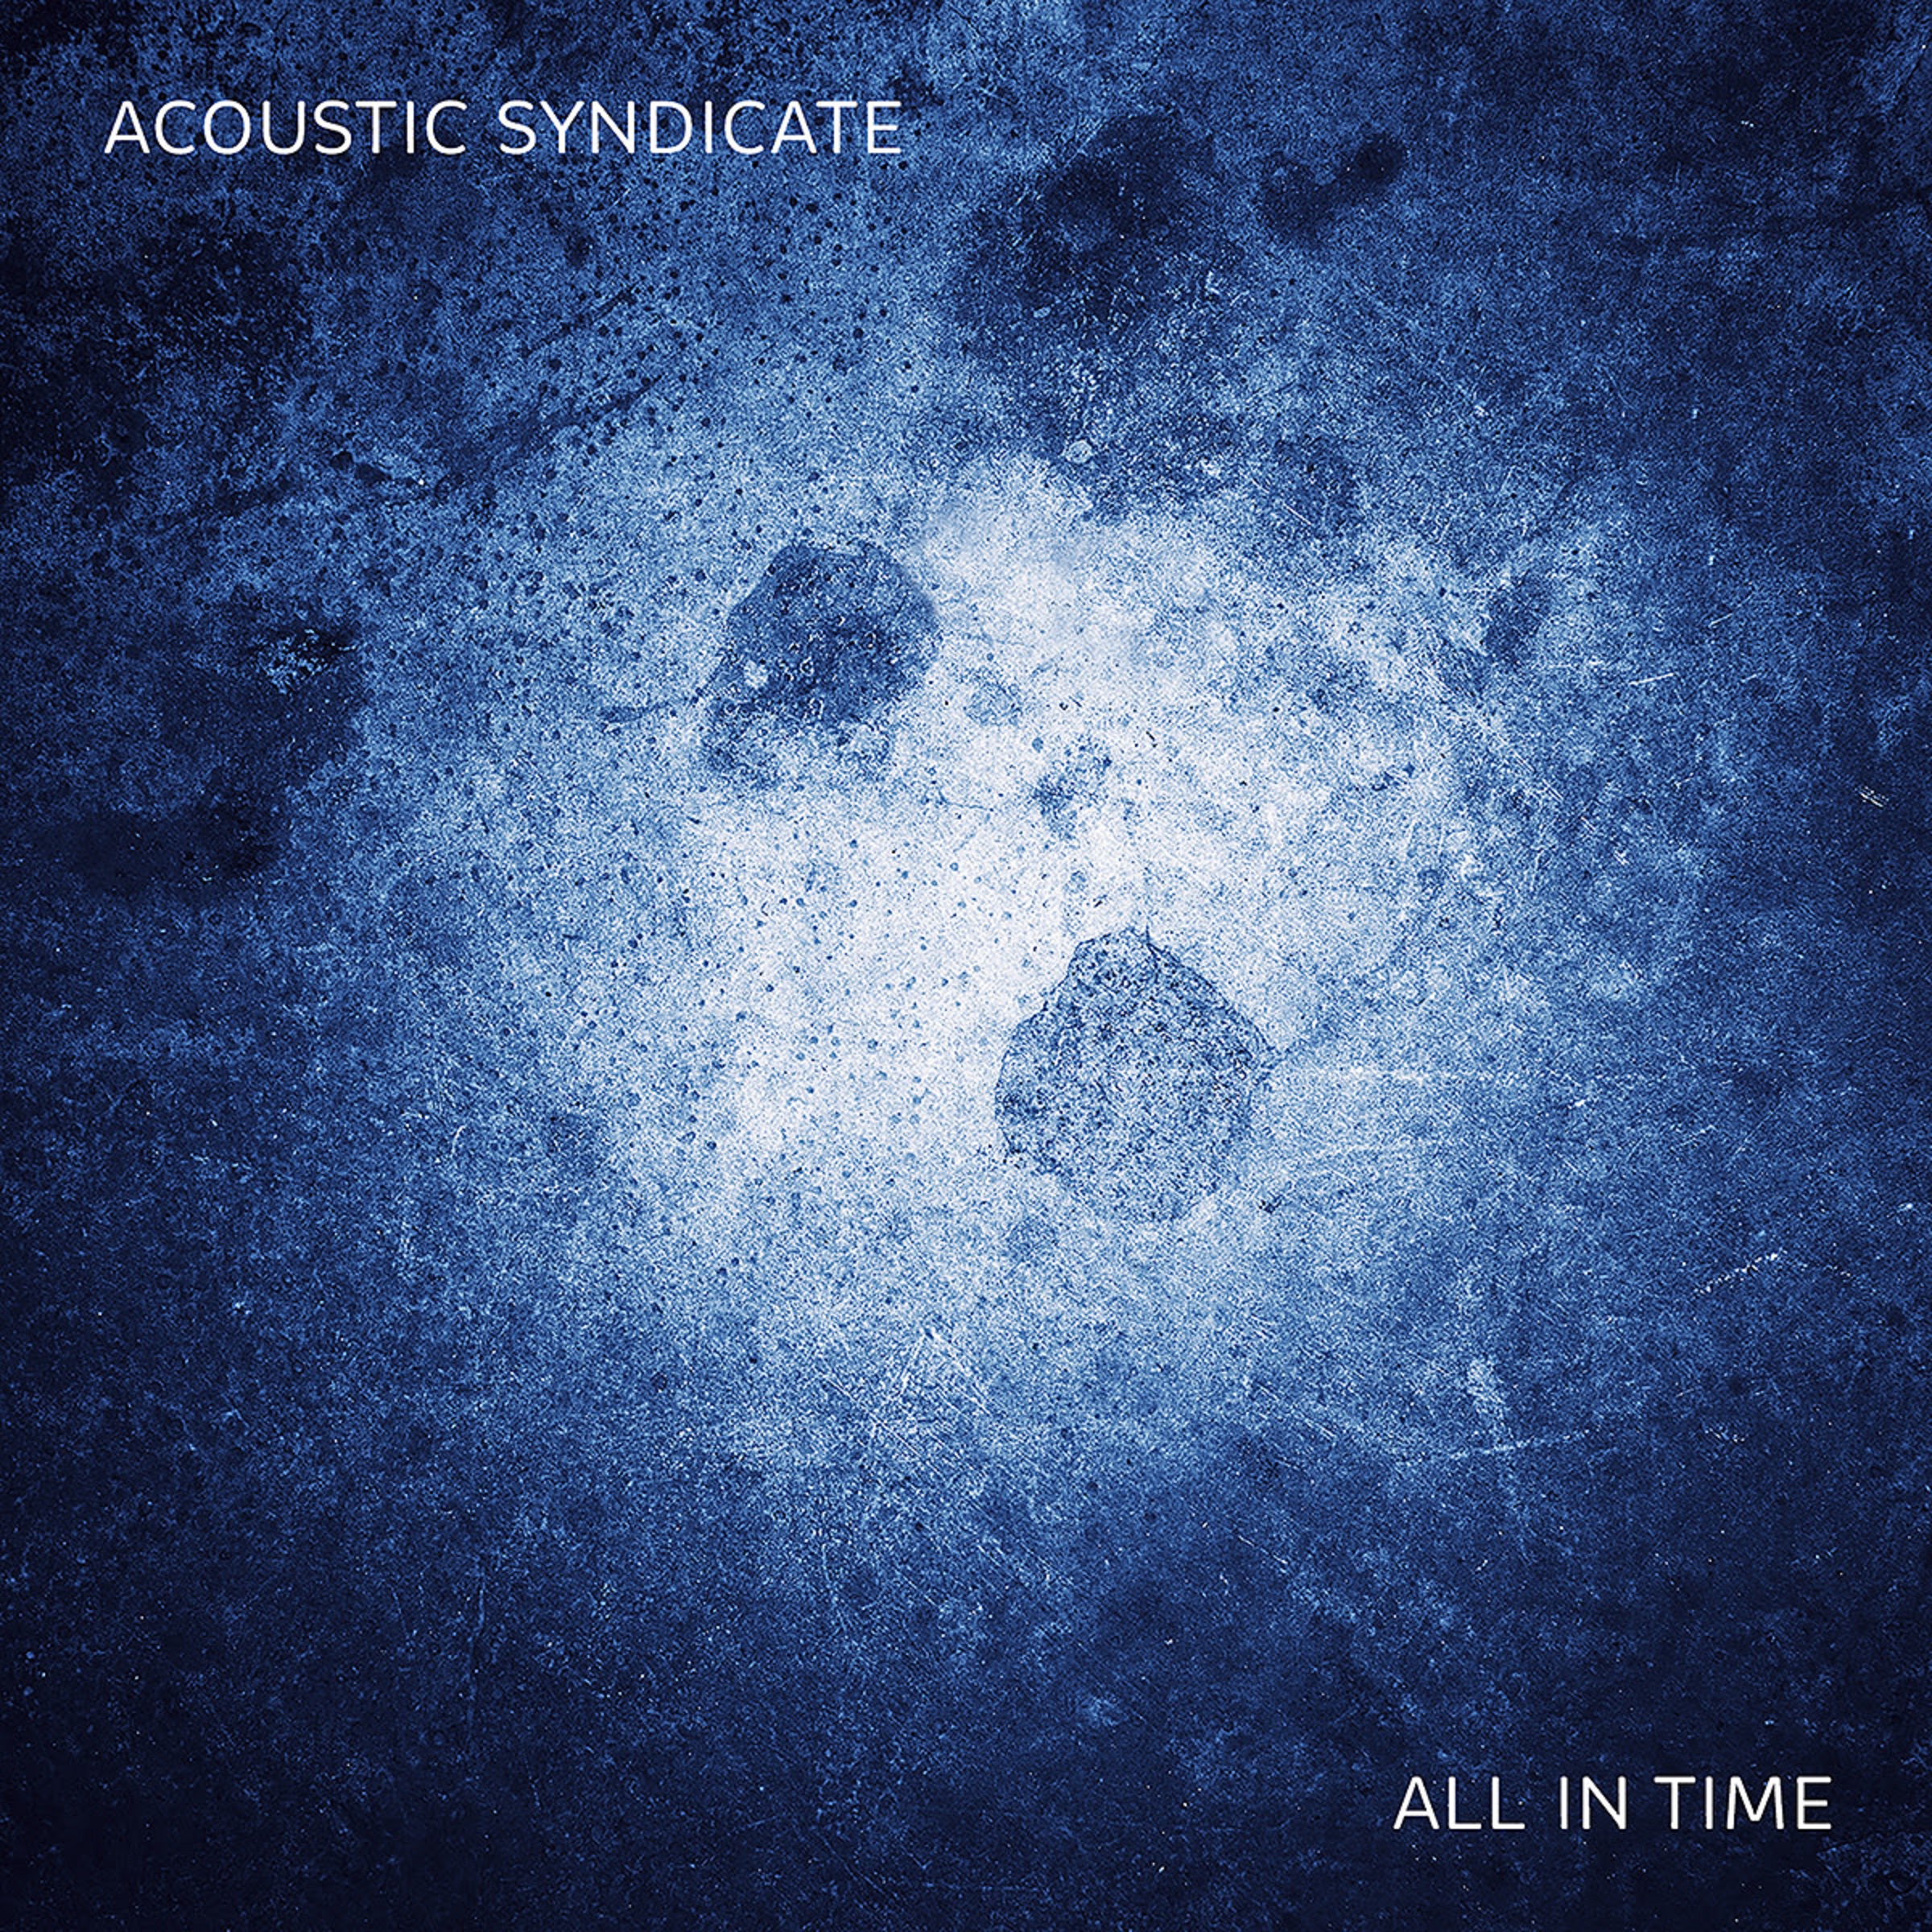 Acoustic Syndicate embarks on a new era with the release of All In Time